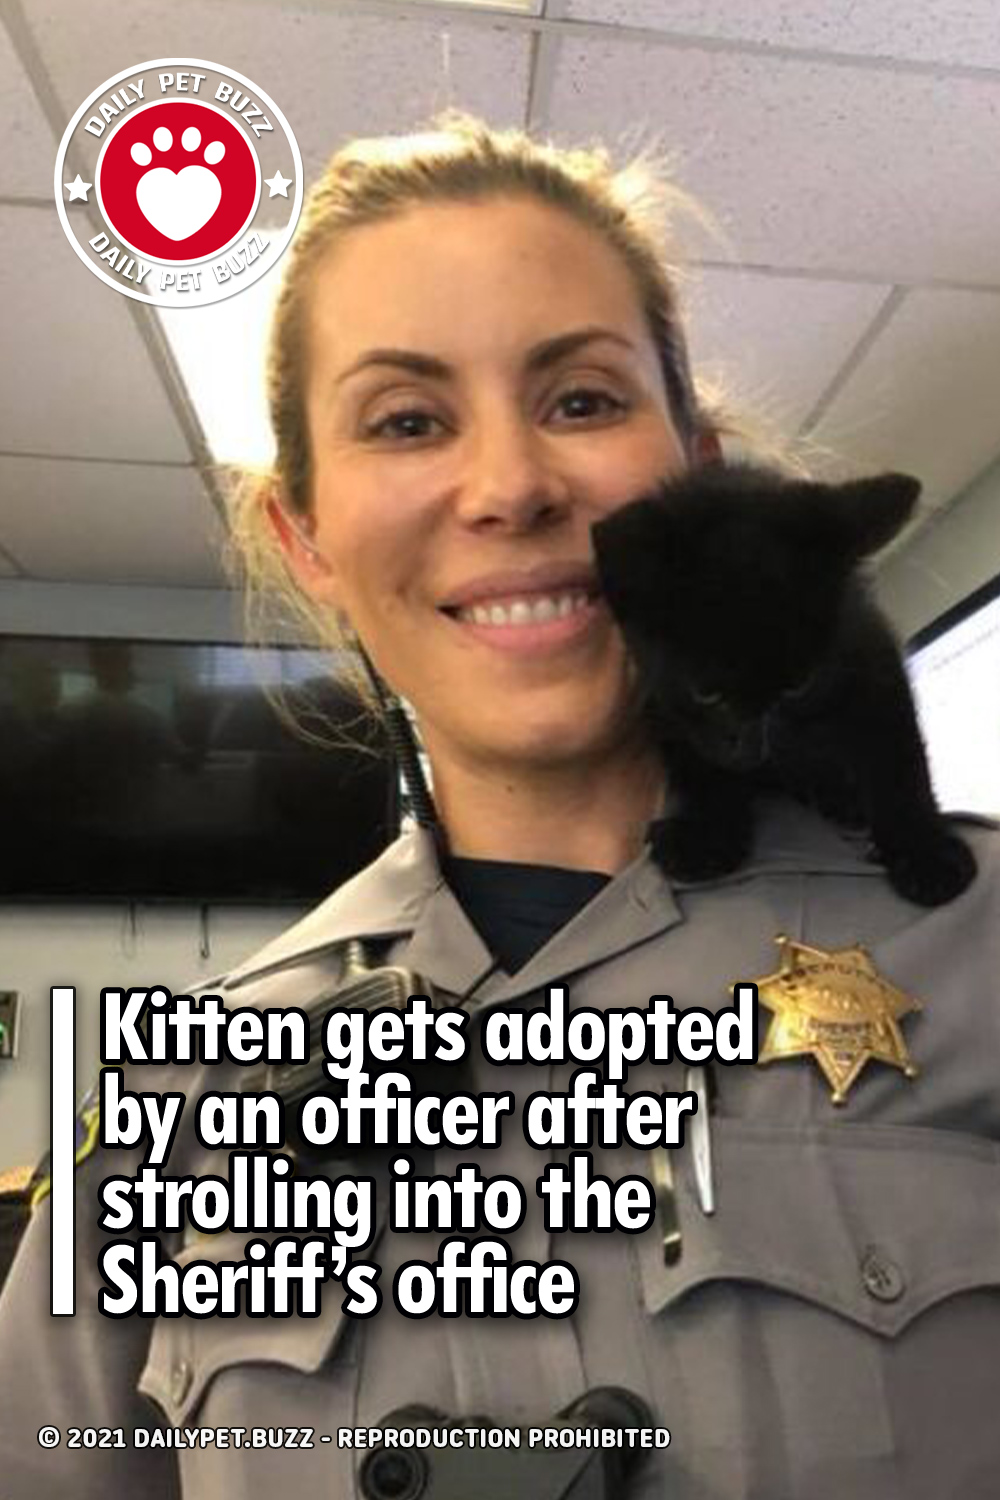 Kitten gets adopted by an officer after strolling into the Sheriff’s office